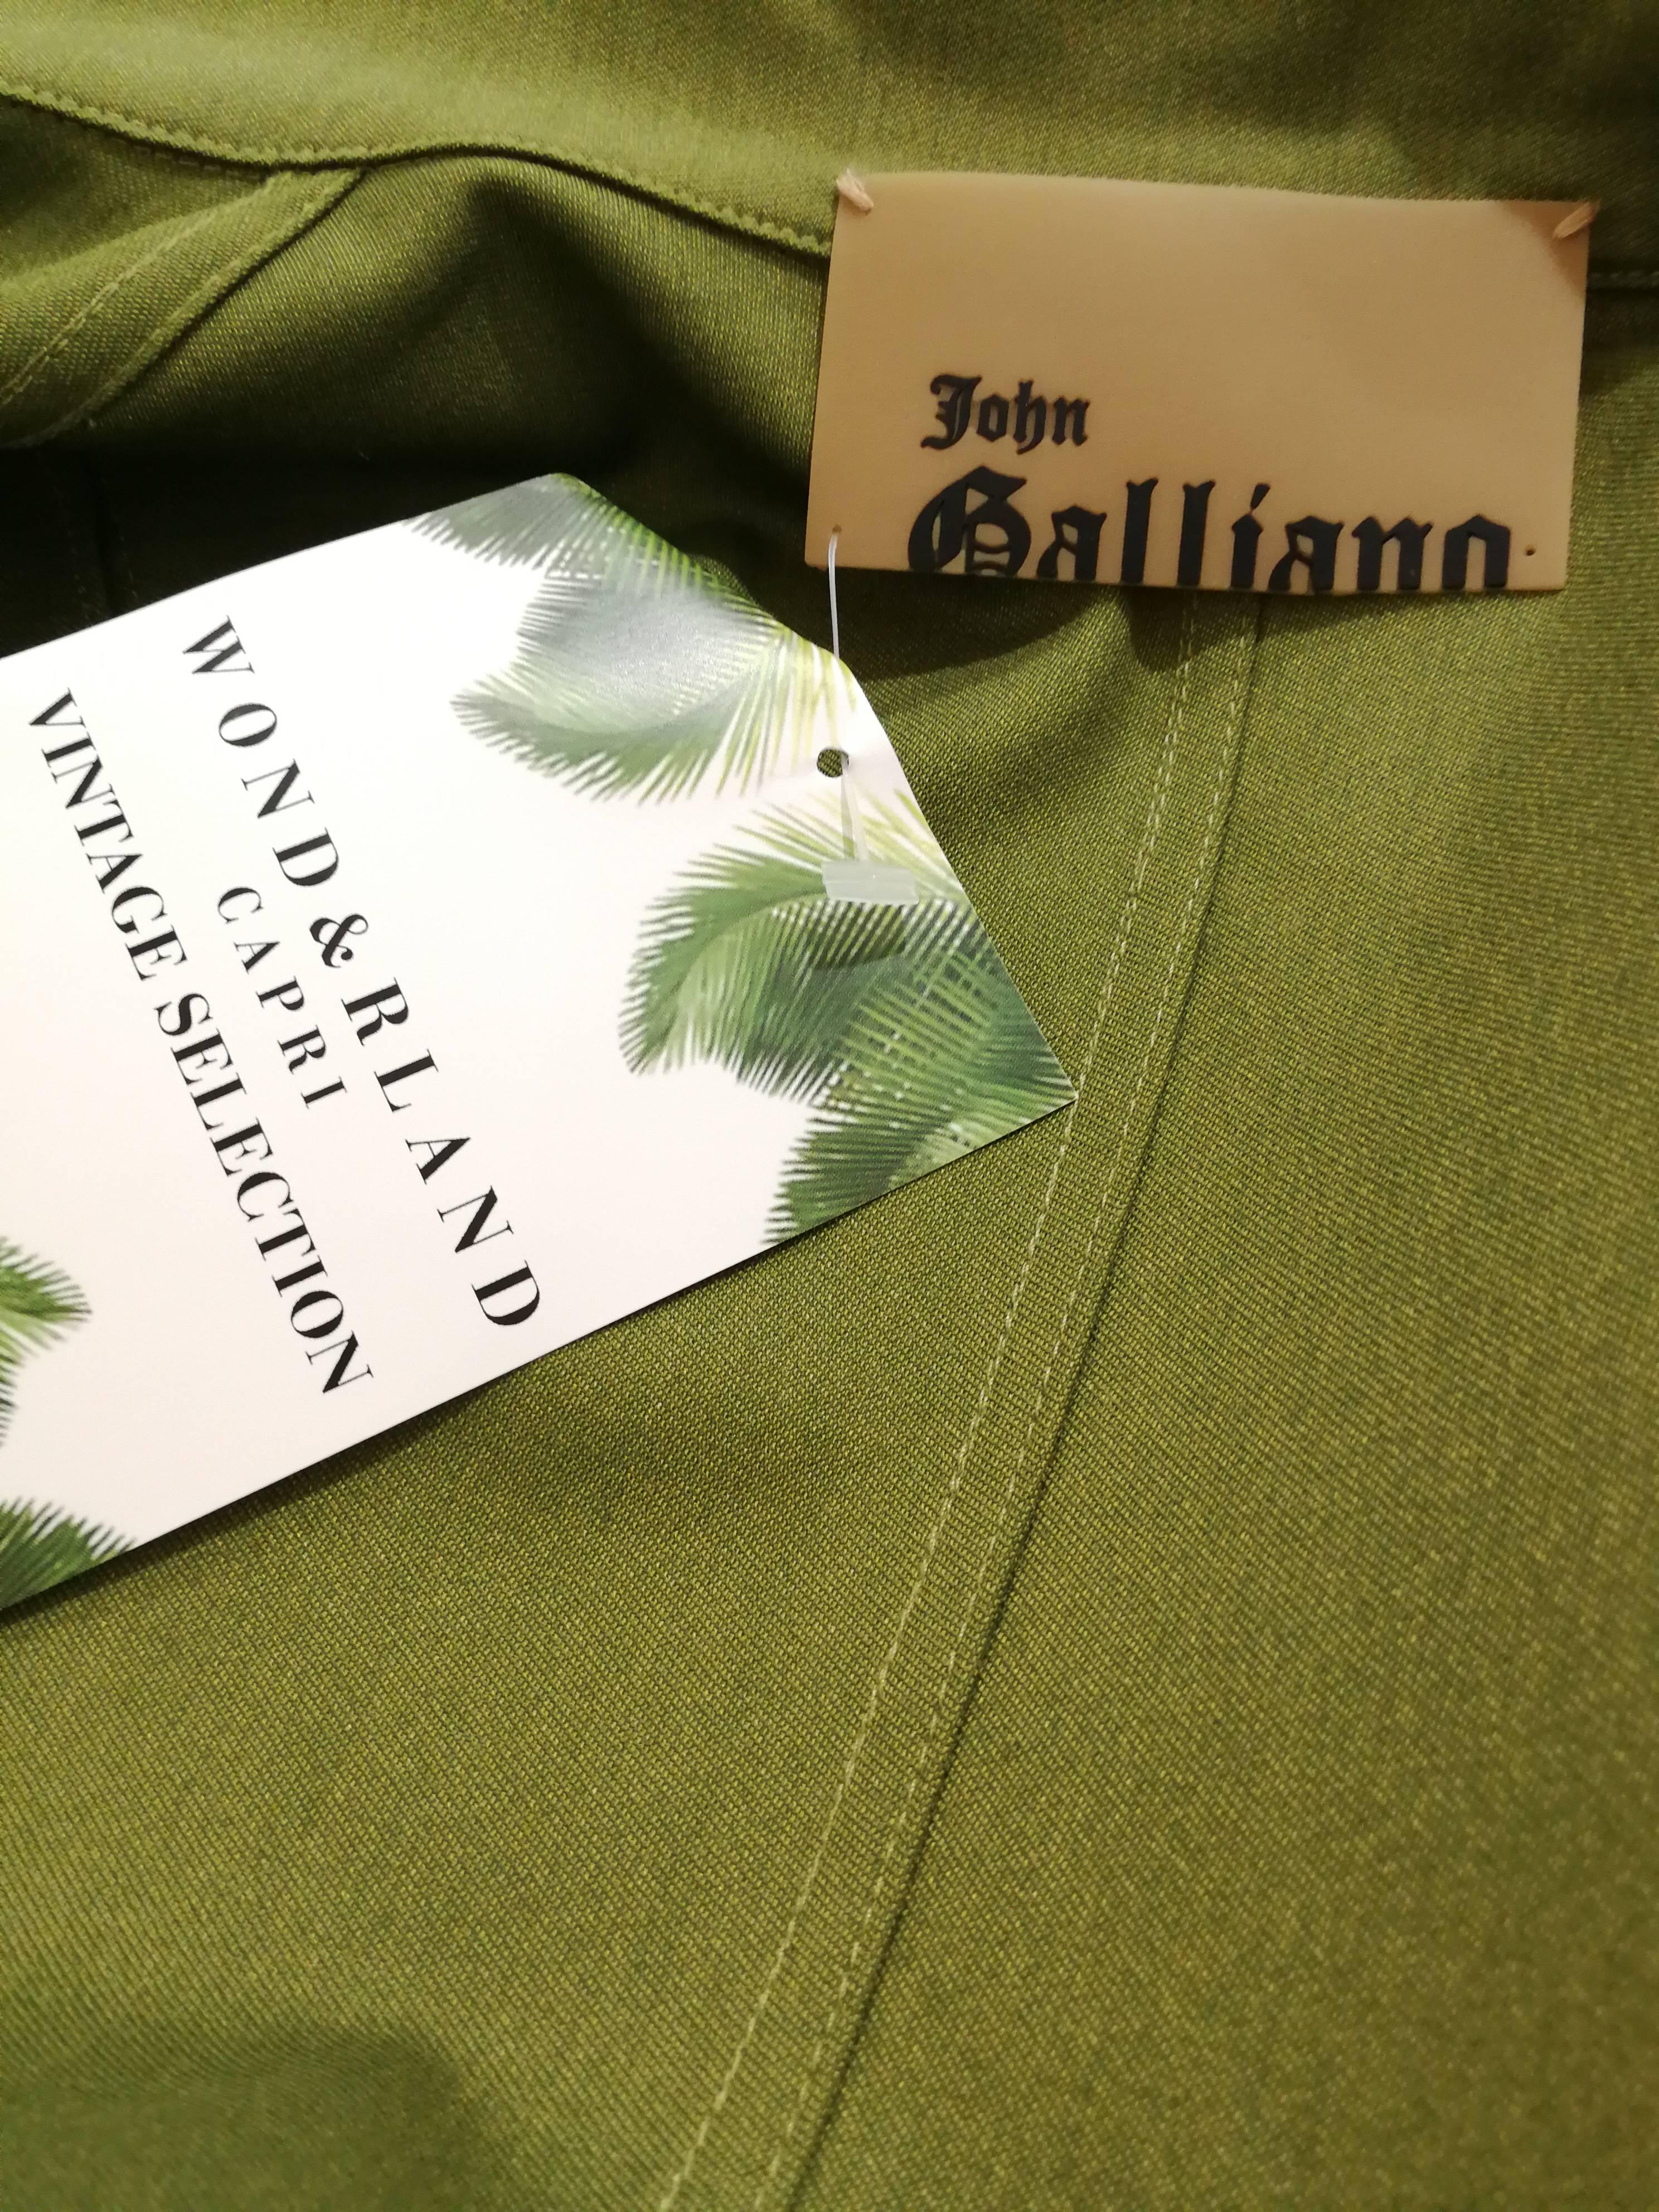 John Galliano Asymmetric Green Jacket

Asymettric Jacket by Galliano totally made in France in size 36

